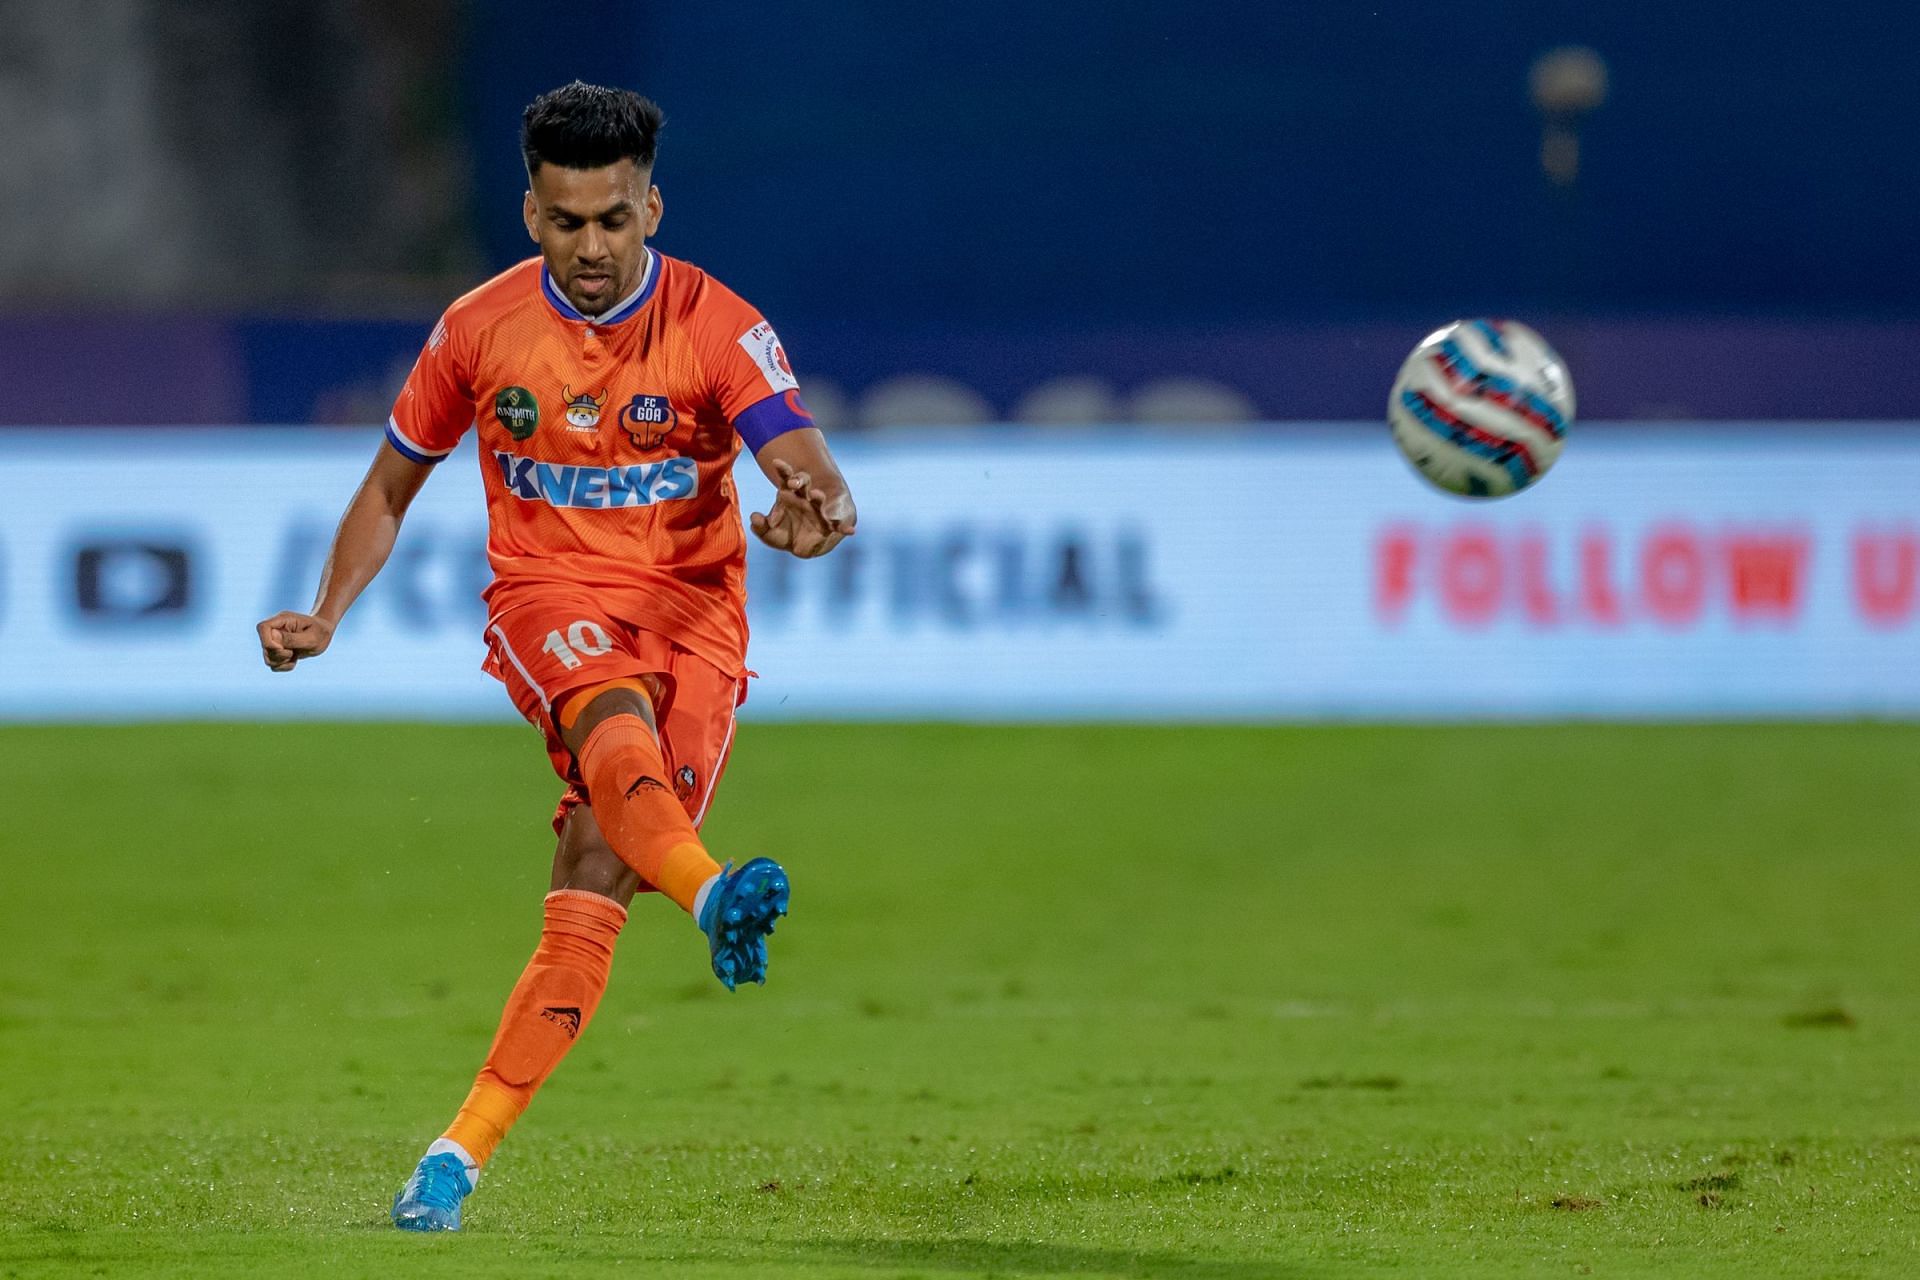 Brandon Fernandes created a few good chances before the lights went off (Image courtesy: ISL Media)